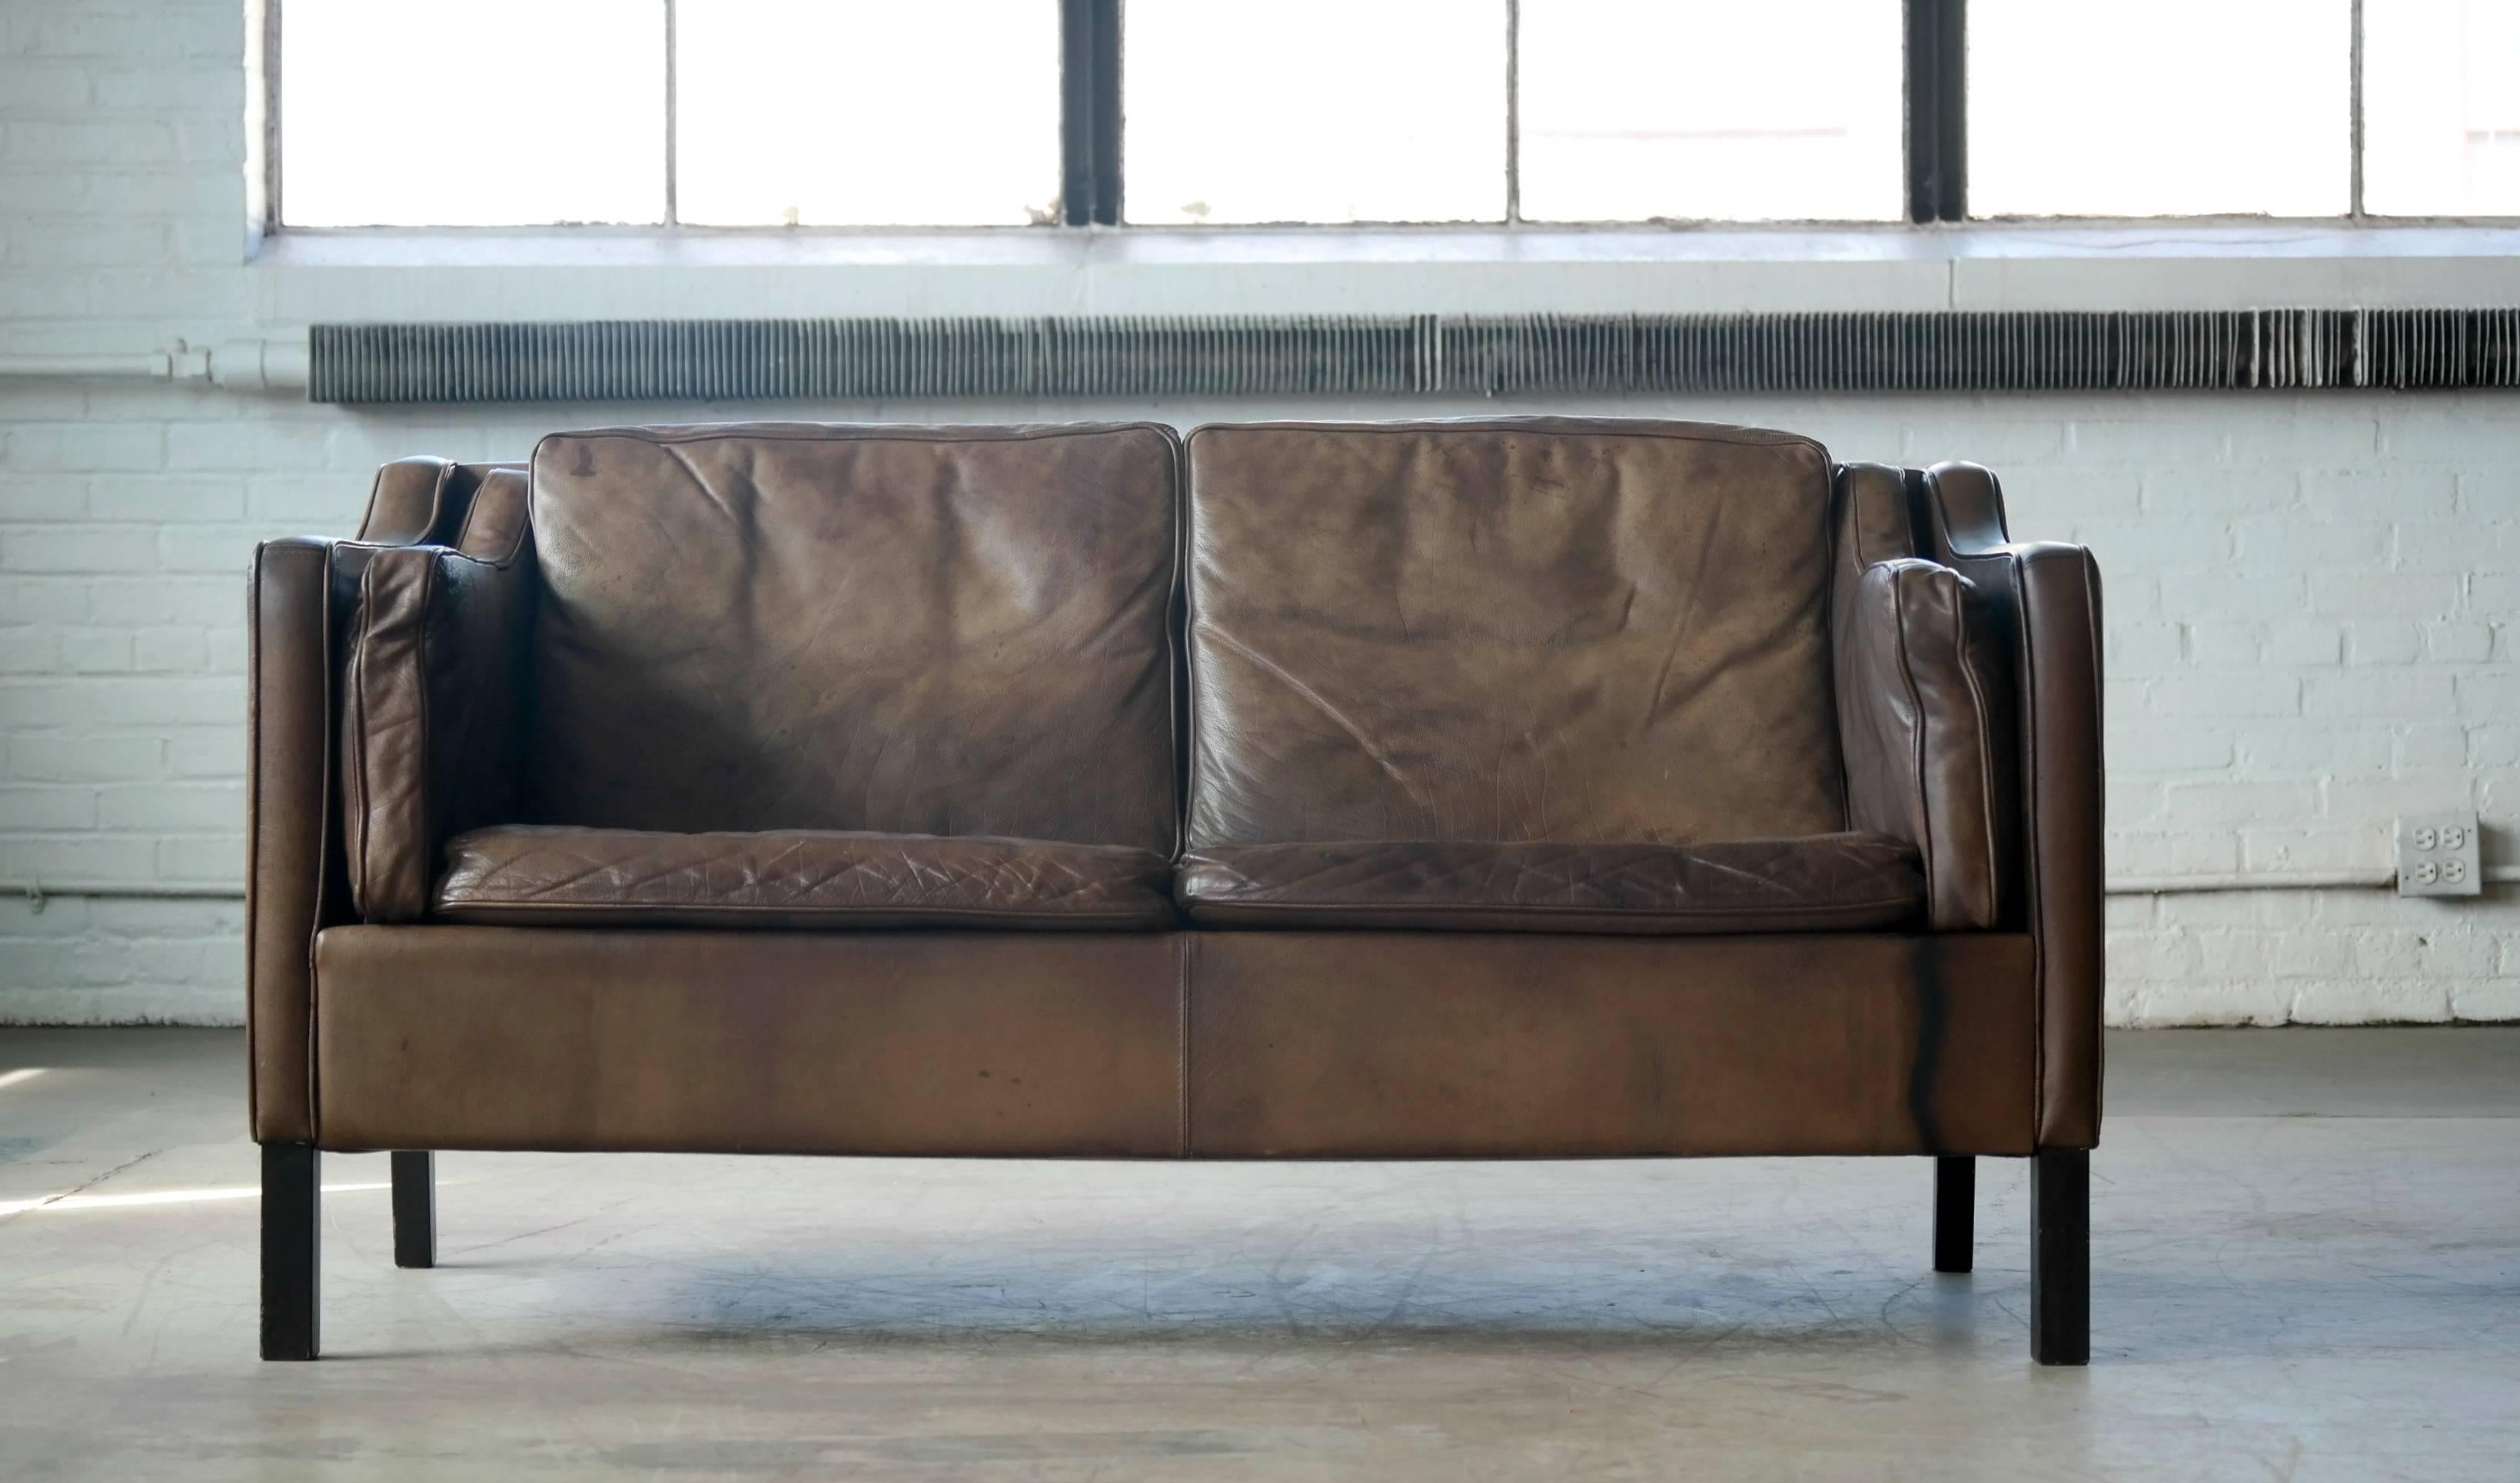 Classic Borge Mogensen style two-seat sofa or loveseat in the style of Borge Mogensen produced by Mogens Hansen. Has achieved that admirable patina that only the combination of aniline buffalo leather and time can produce. Fantastic patina and